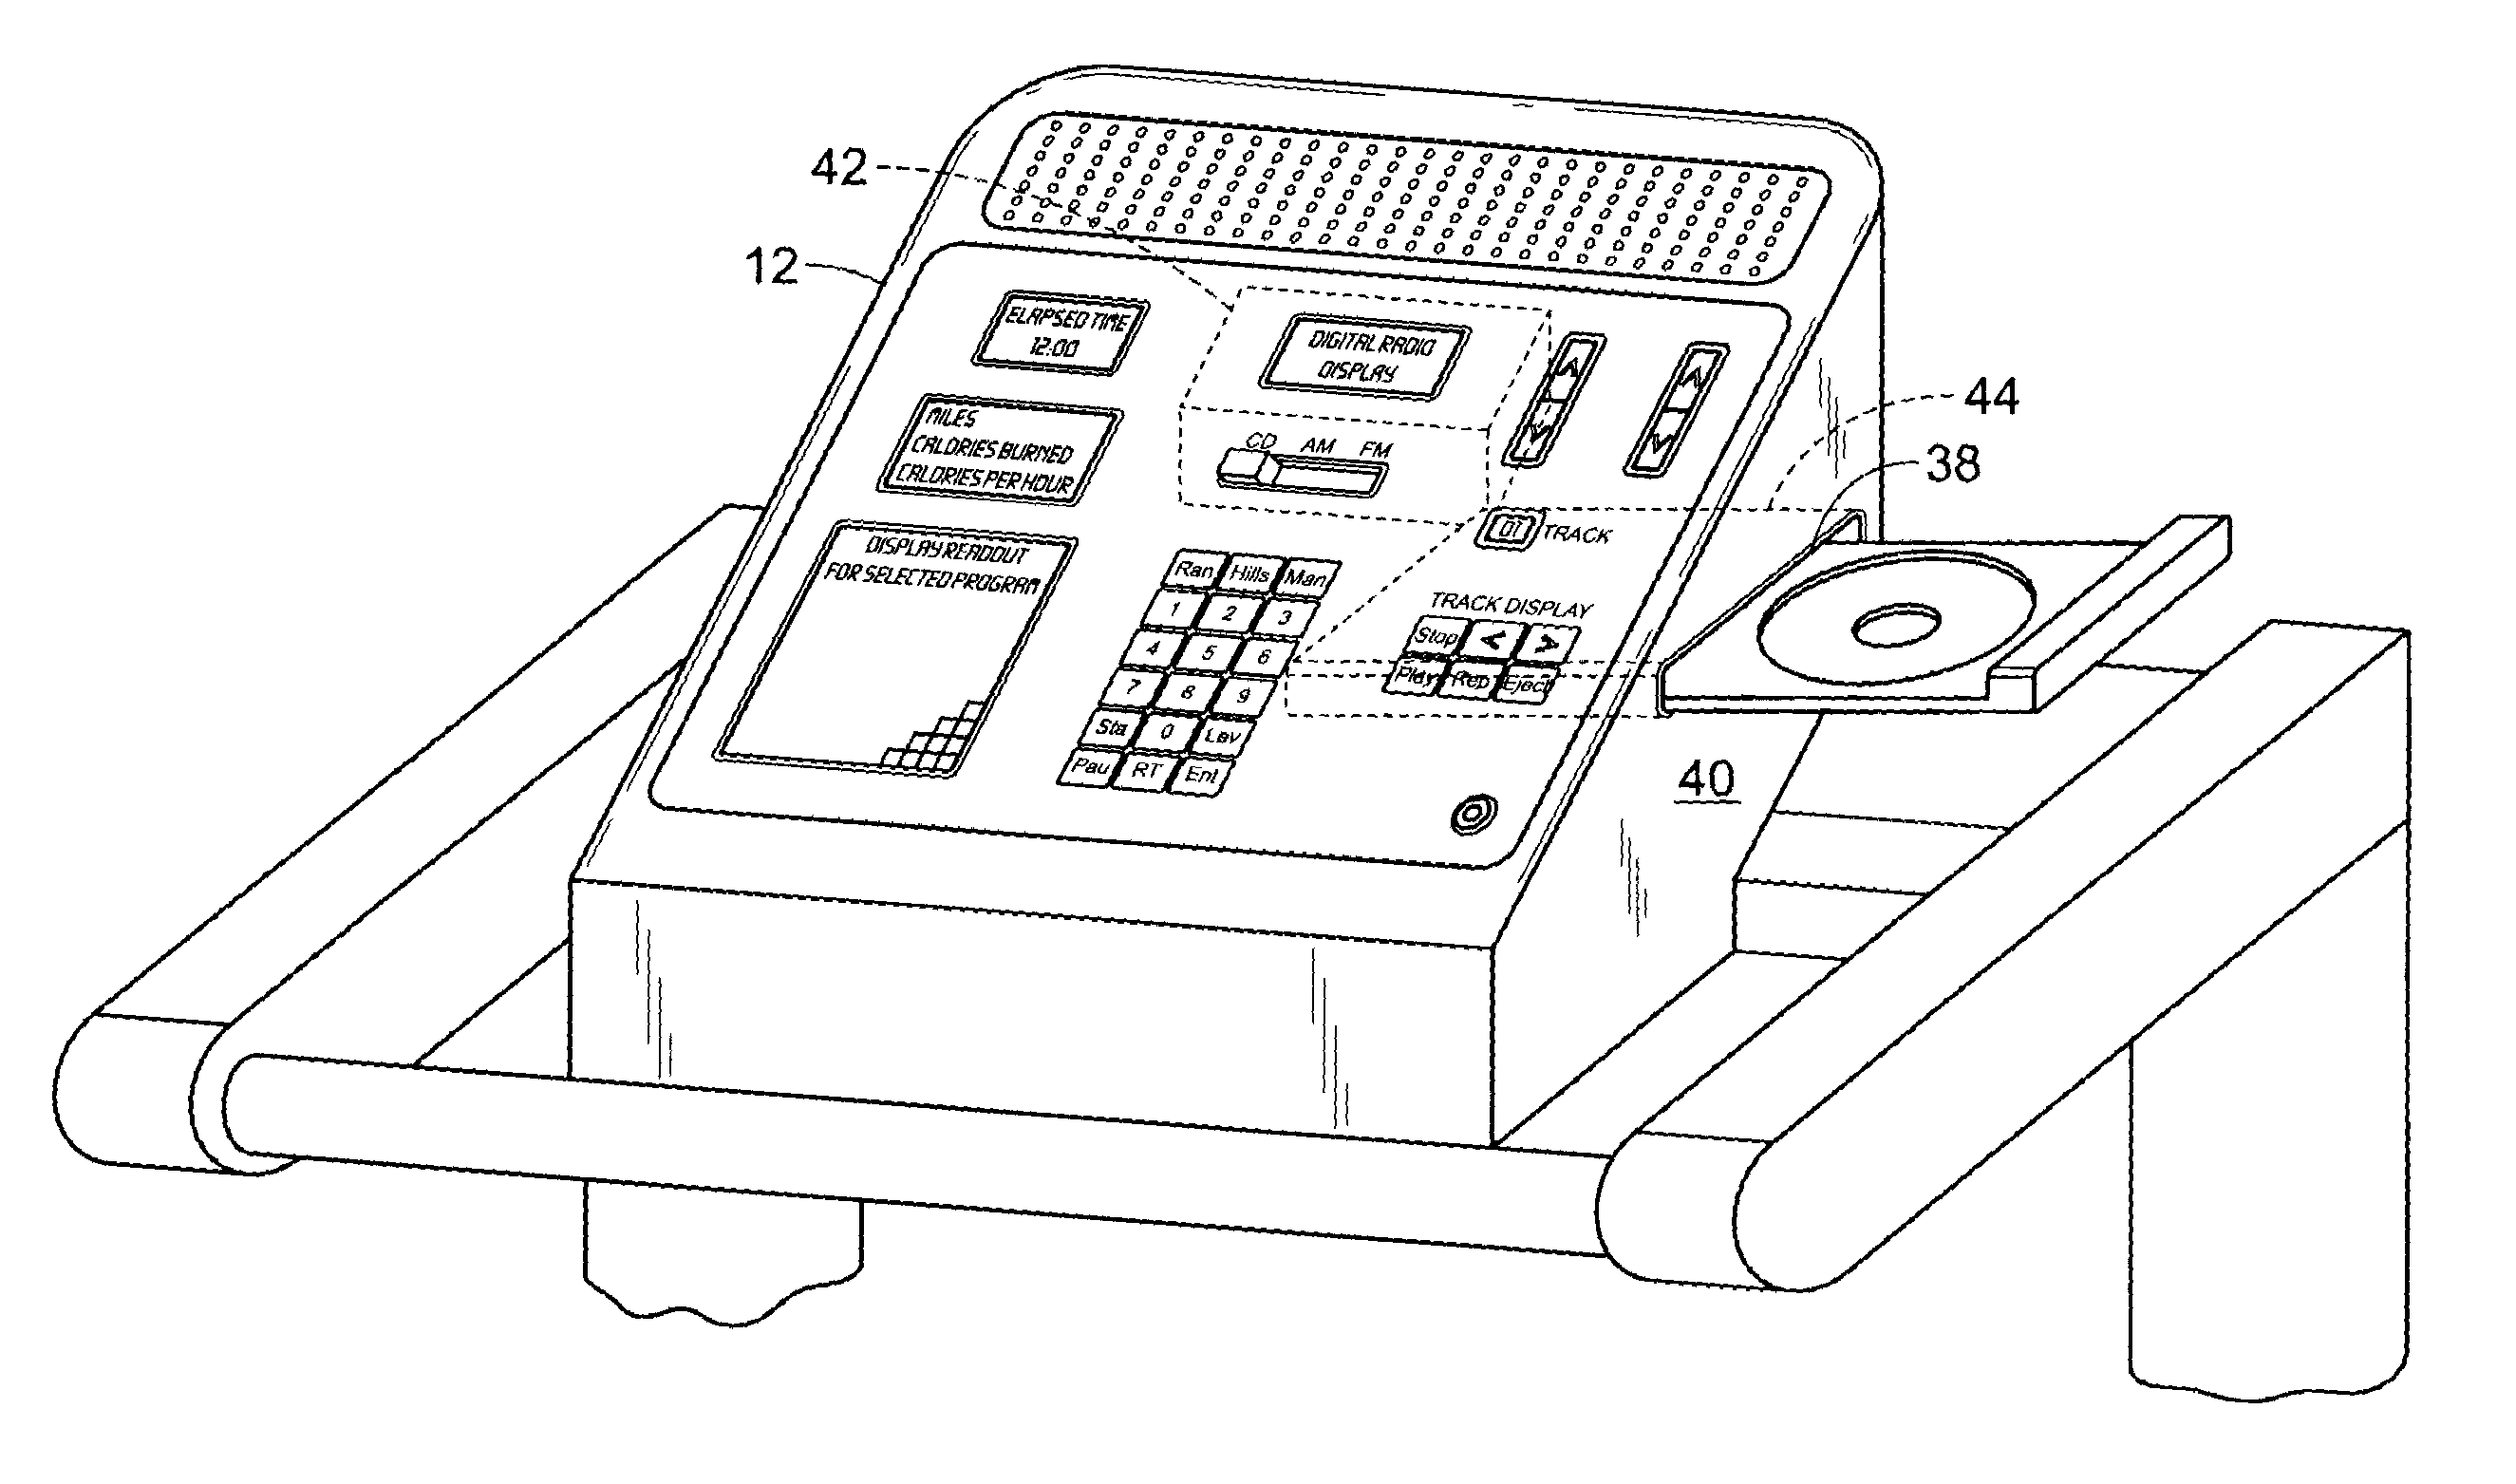 Control panel for use while exercising